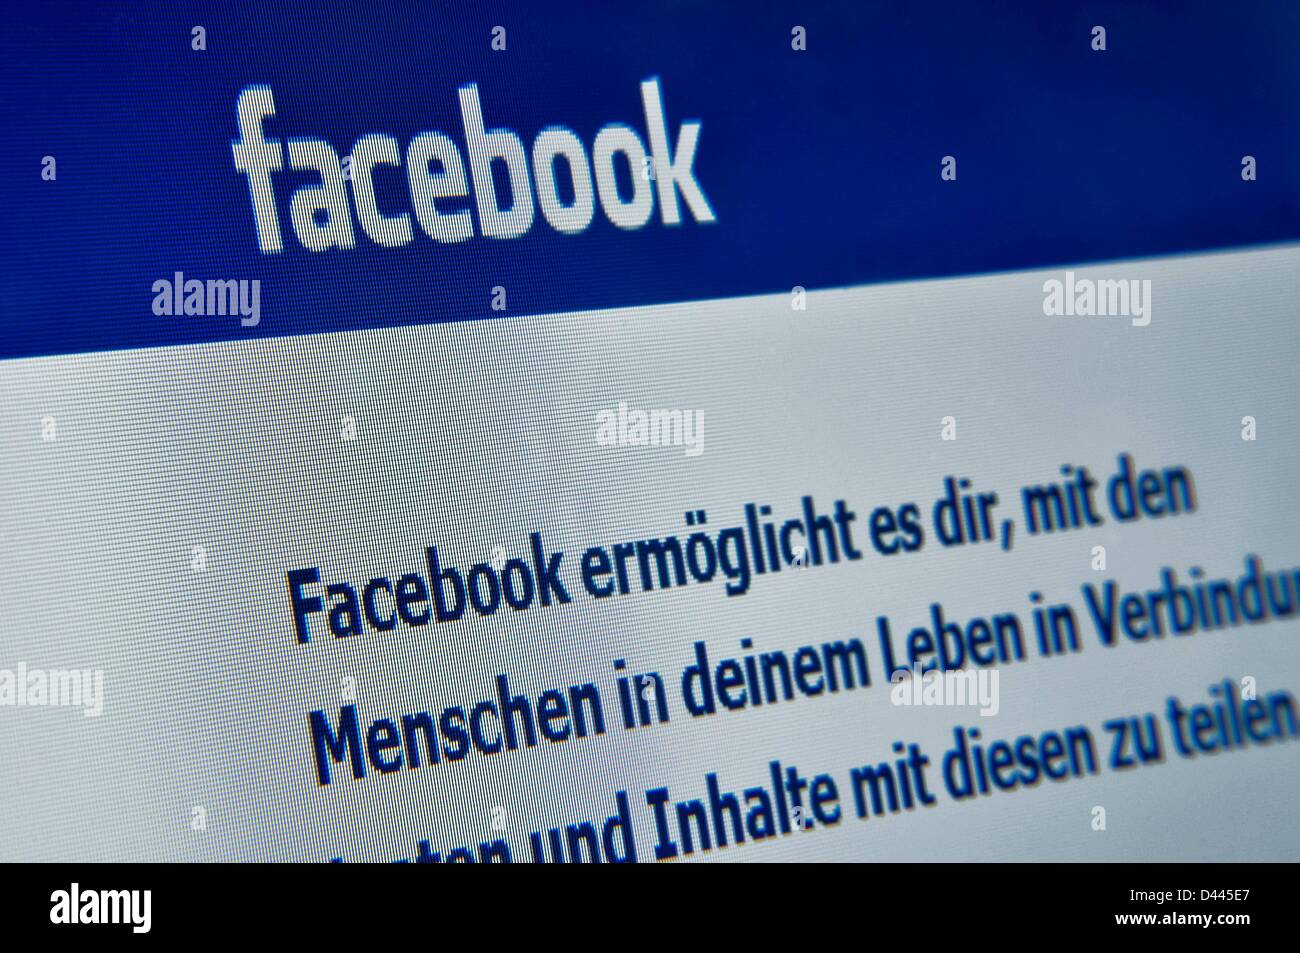 lllustration - View of the Internet page of the social networking service 'facebook' on 9 July 2911. In the text that is written beneath the logo, the German translation of the motto of the company is presented: 'Facebook helps you connect and share with the people in your life.' Fotoarchiv für ZeitgeschichteS.Steinach Stock Photo